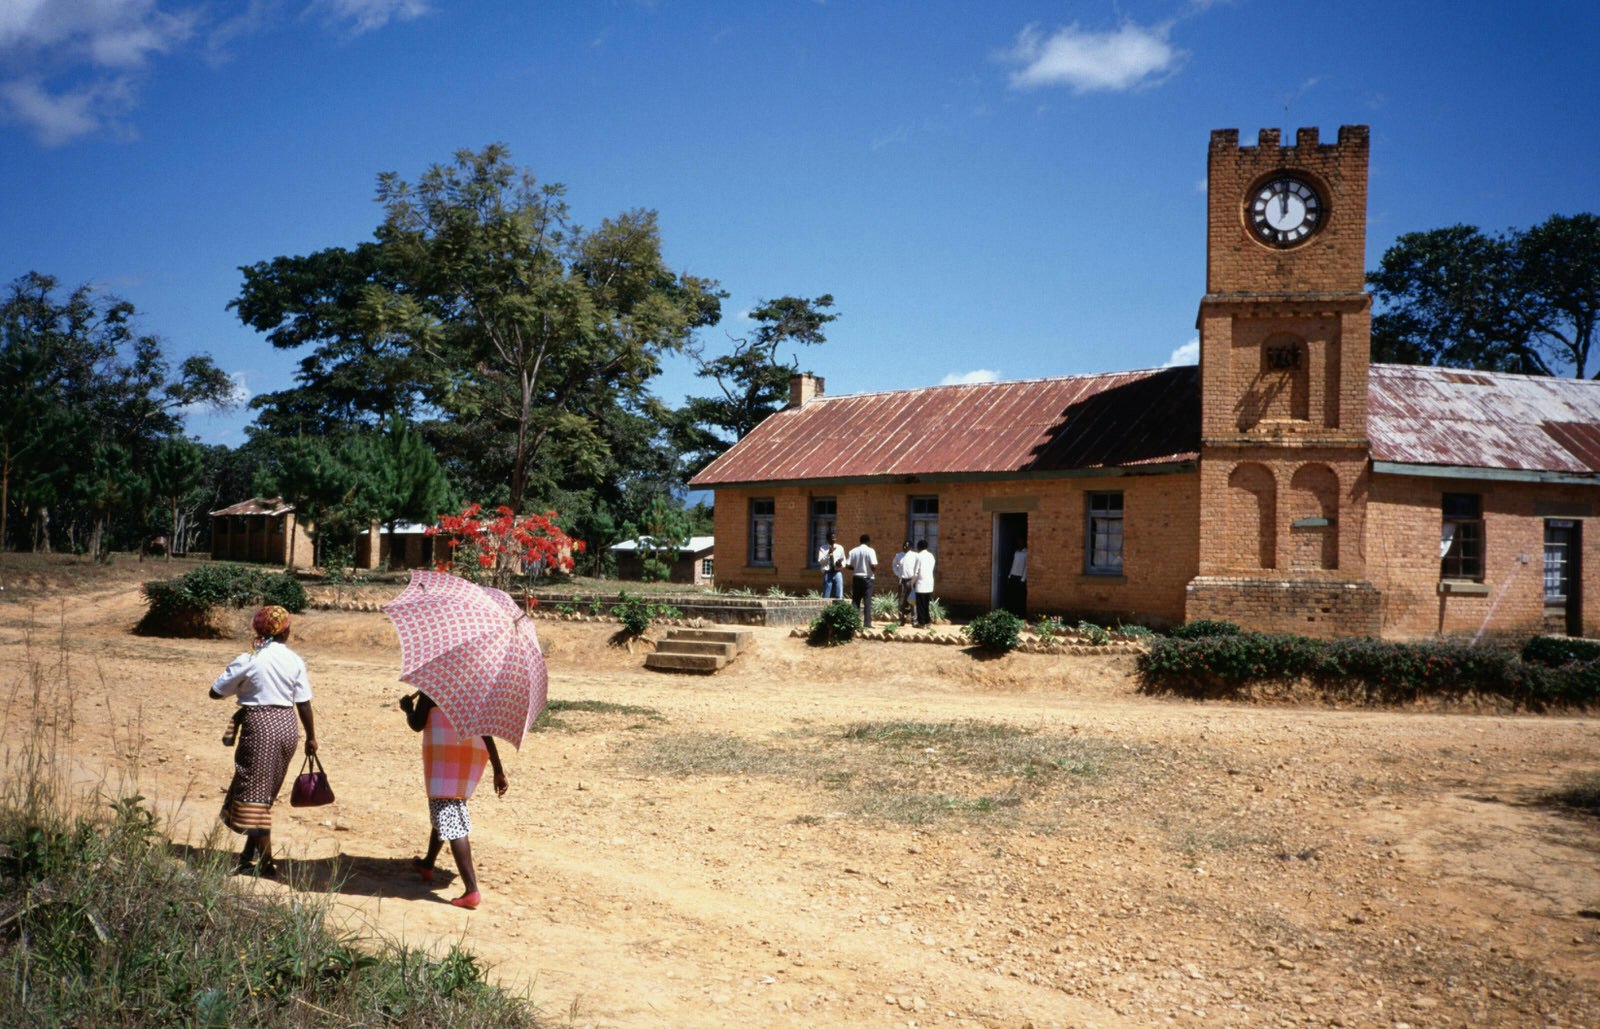 A stone church, with a red tin roof and large castellated clock tower sit beneath blue skies and next to some stands of trees; people mill outside the church, and two women (one holding an umbrella against the sun) walk by on the dirt road in the foreground